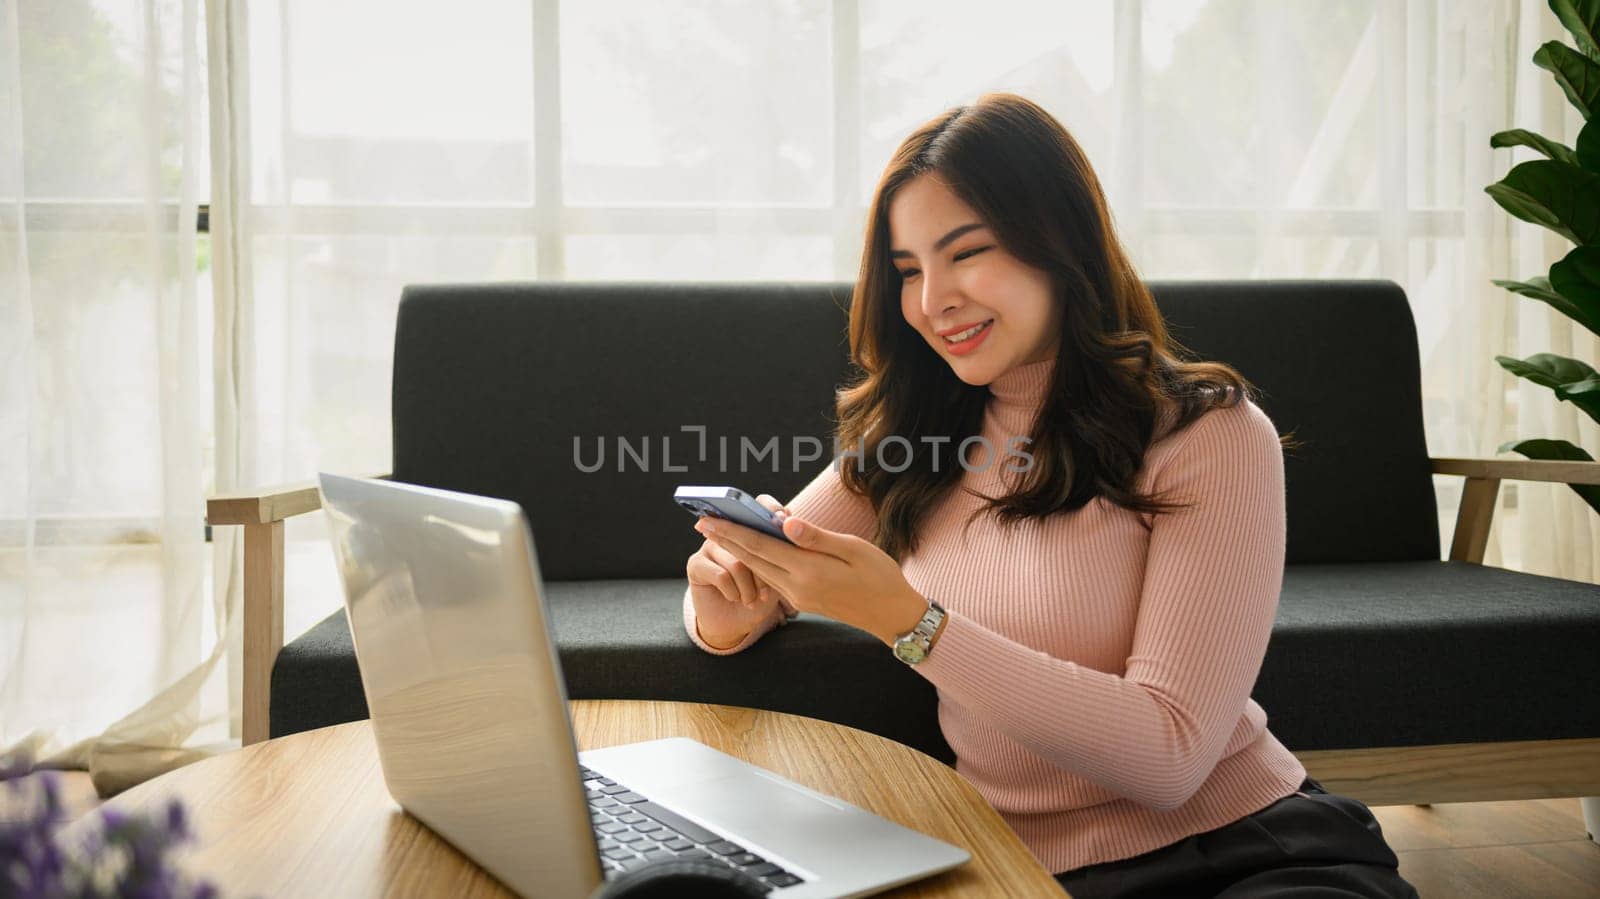 Relaxed young woman using smartphone communication in social media while sitting in living room.